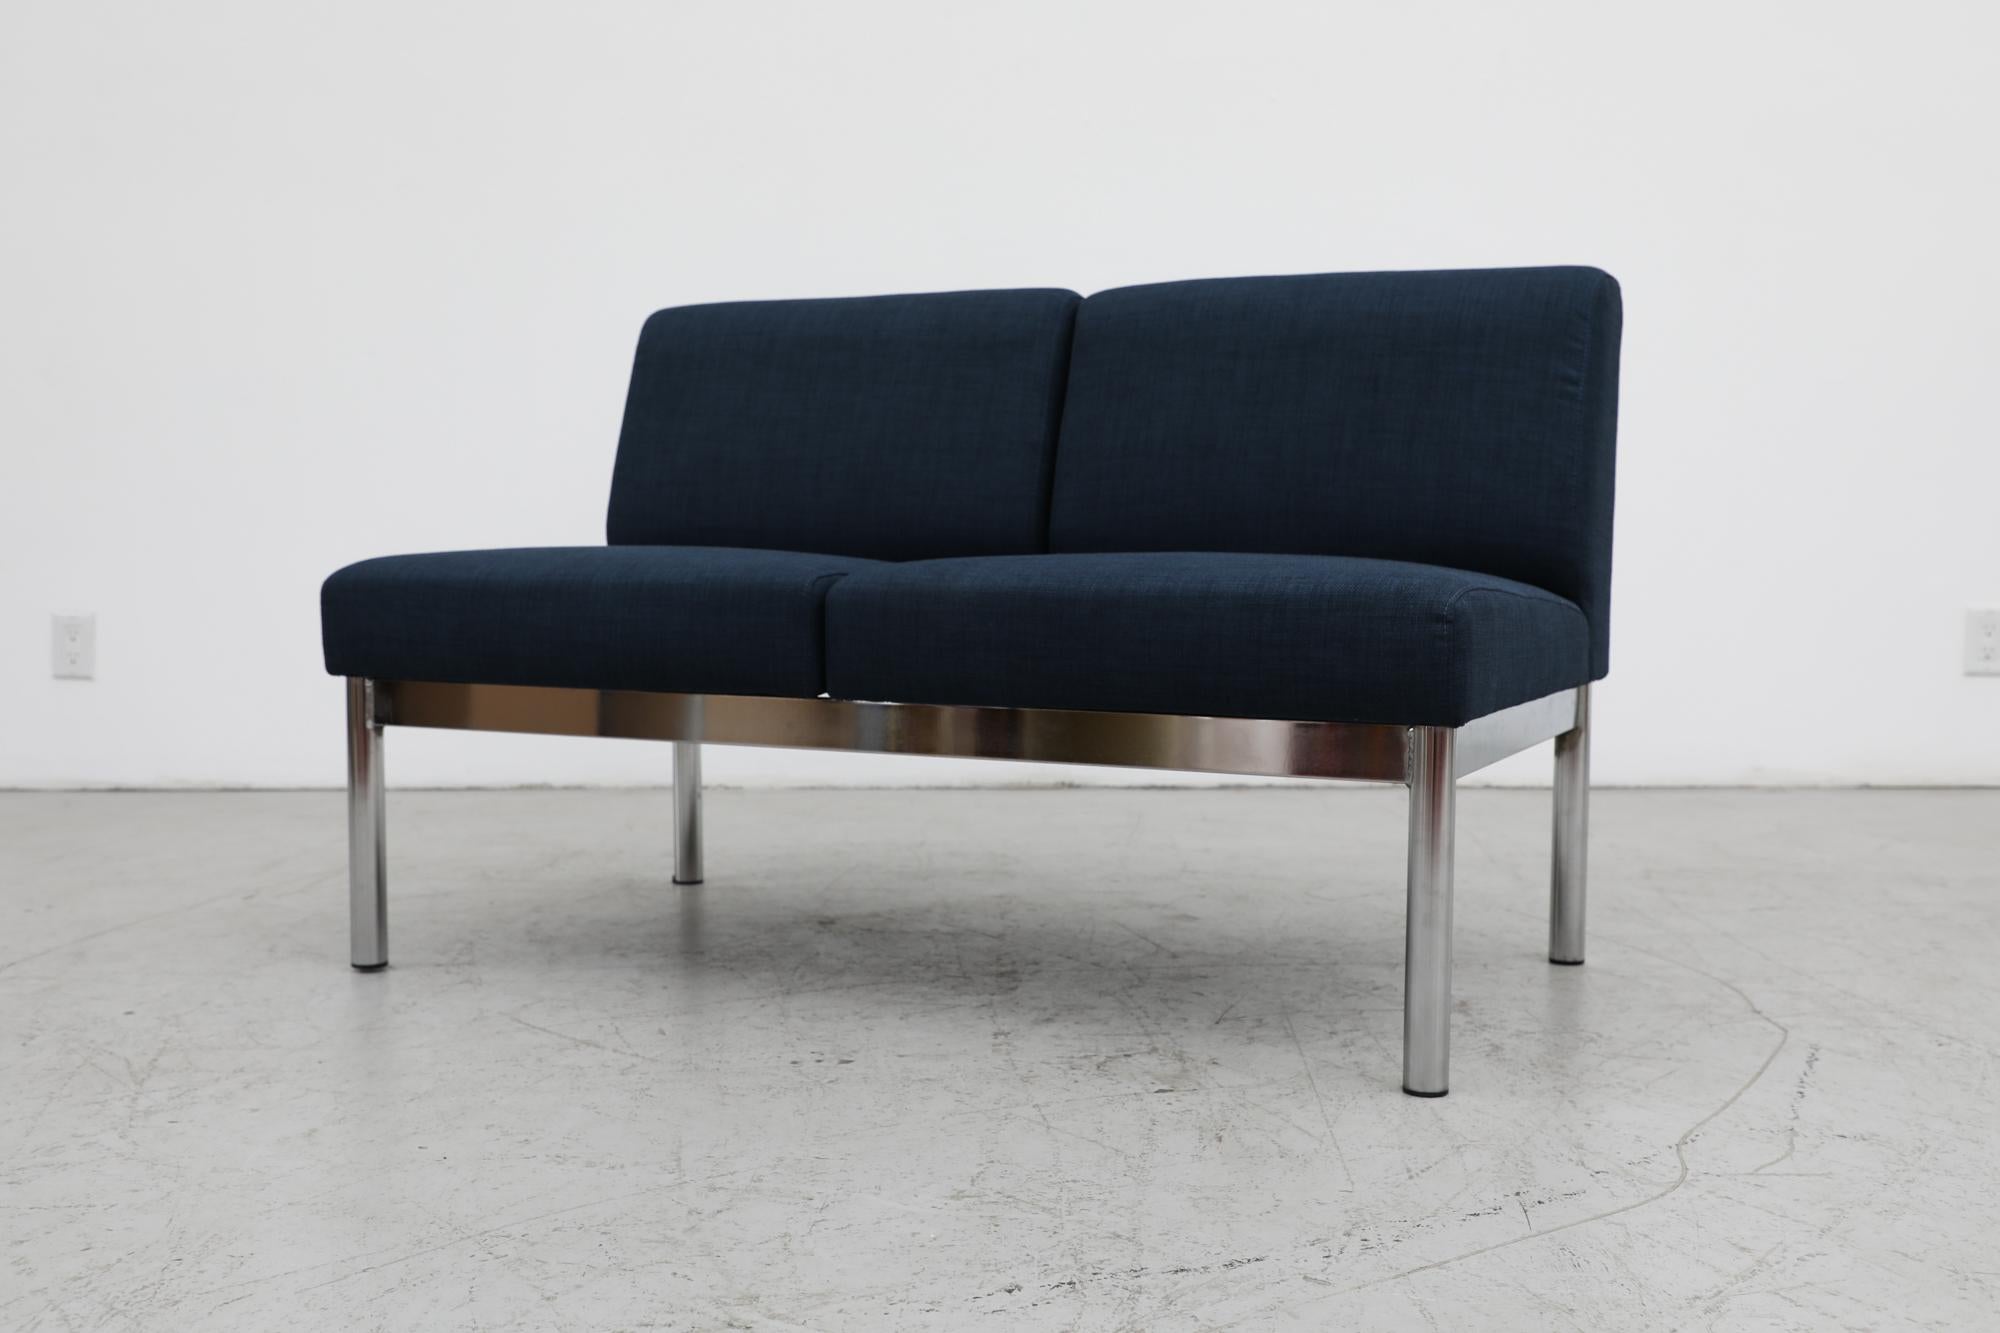 Mid-Century Gelderland style 3 seater sofa with chrome frame and newly upholstered sapphire blue cushions.These are easy to swap positions by simply unscrewing from the base and flipping the seat or table direction, or swapping with a different